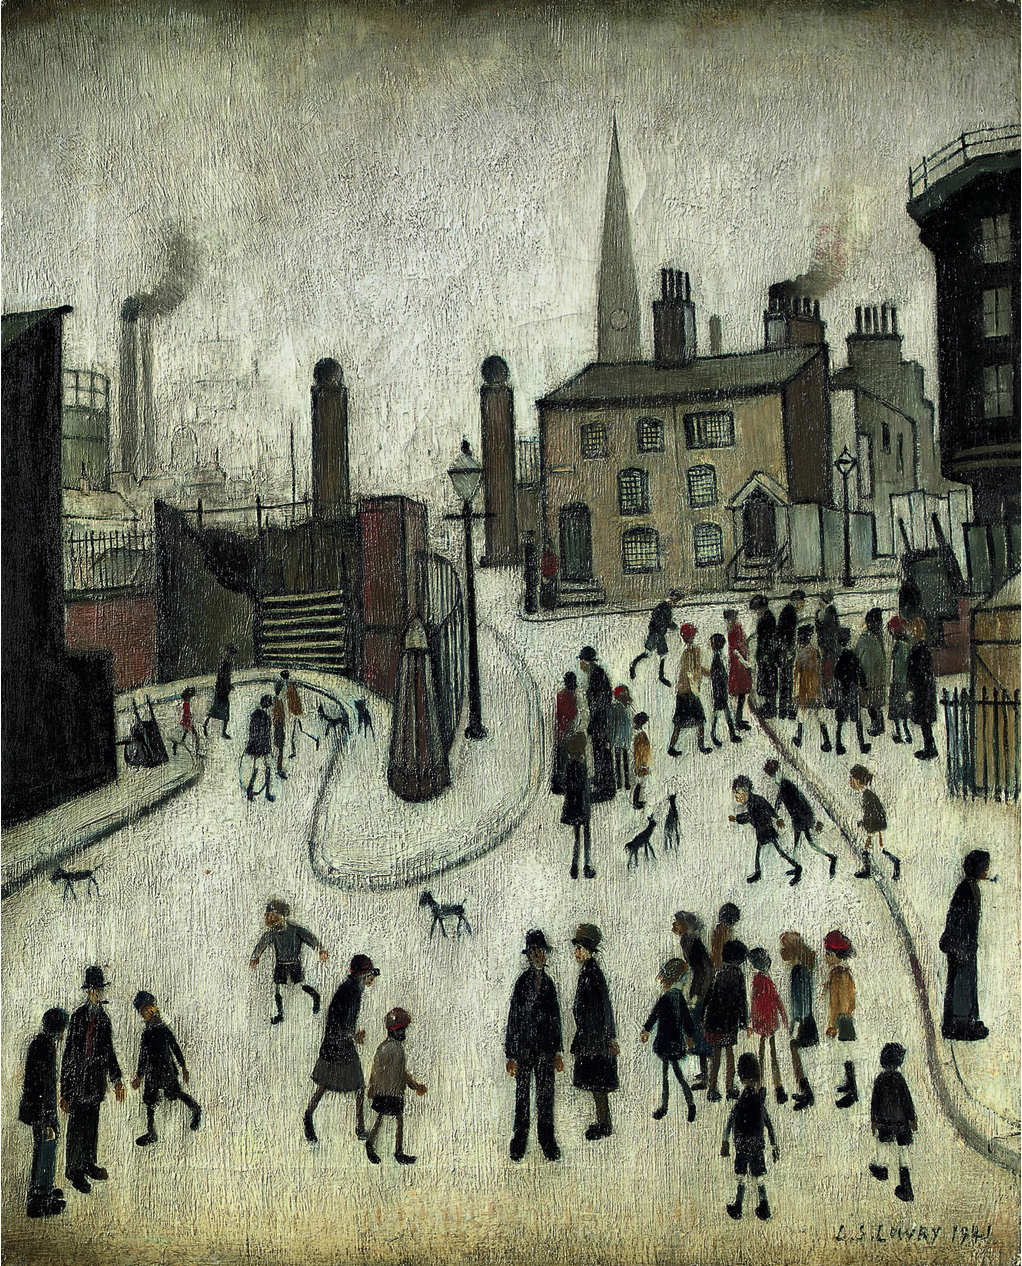 St Michael and All Angels, Angel Meadow, Manchester (1941) by Laurence Stephen Lowry (1887 - 1976), English artist.